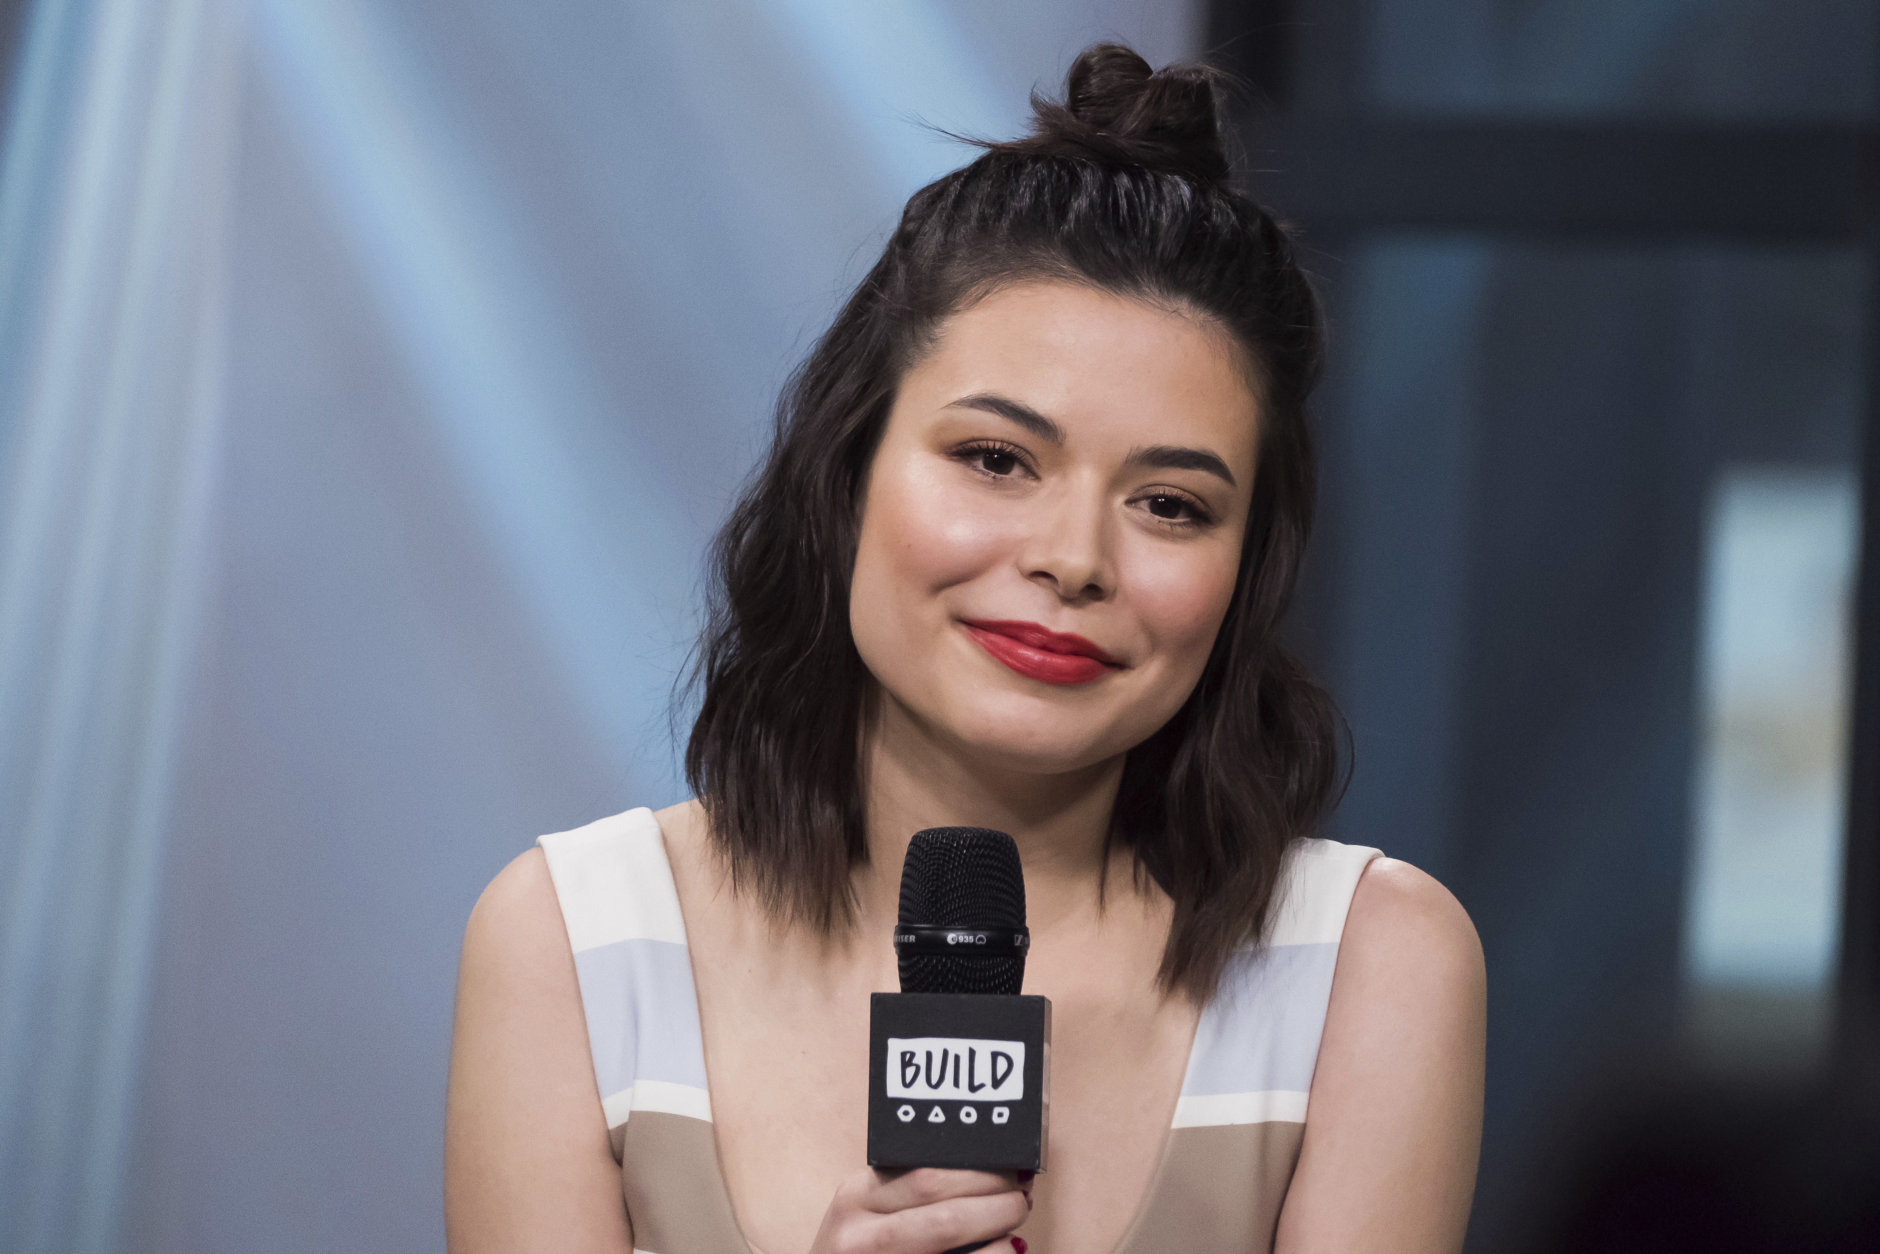 Miranda Cosgrove participates in the BUILD Speaker Series to discuss her film "Despicable Me 3" at AOL Studios on Thursday, Dec. 7, 2017, in New York. (Photo by Charles Sykes/Invision/AP)